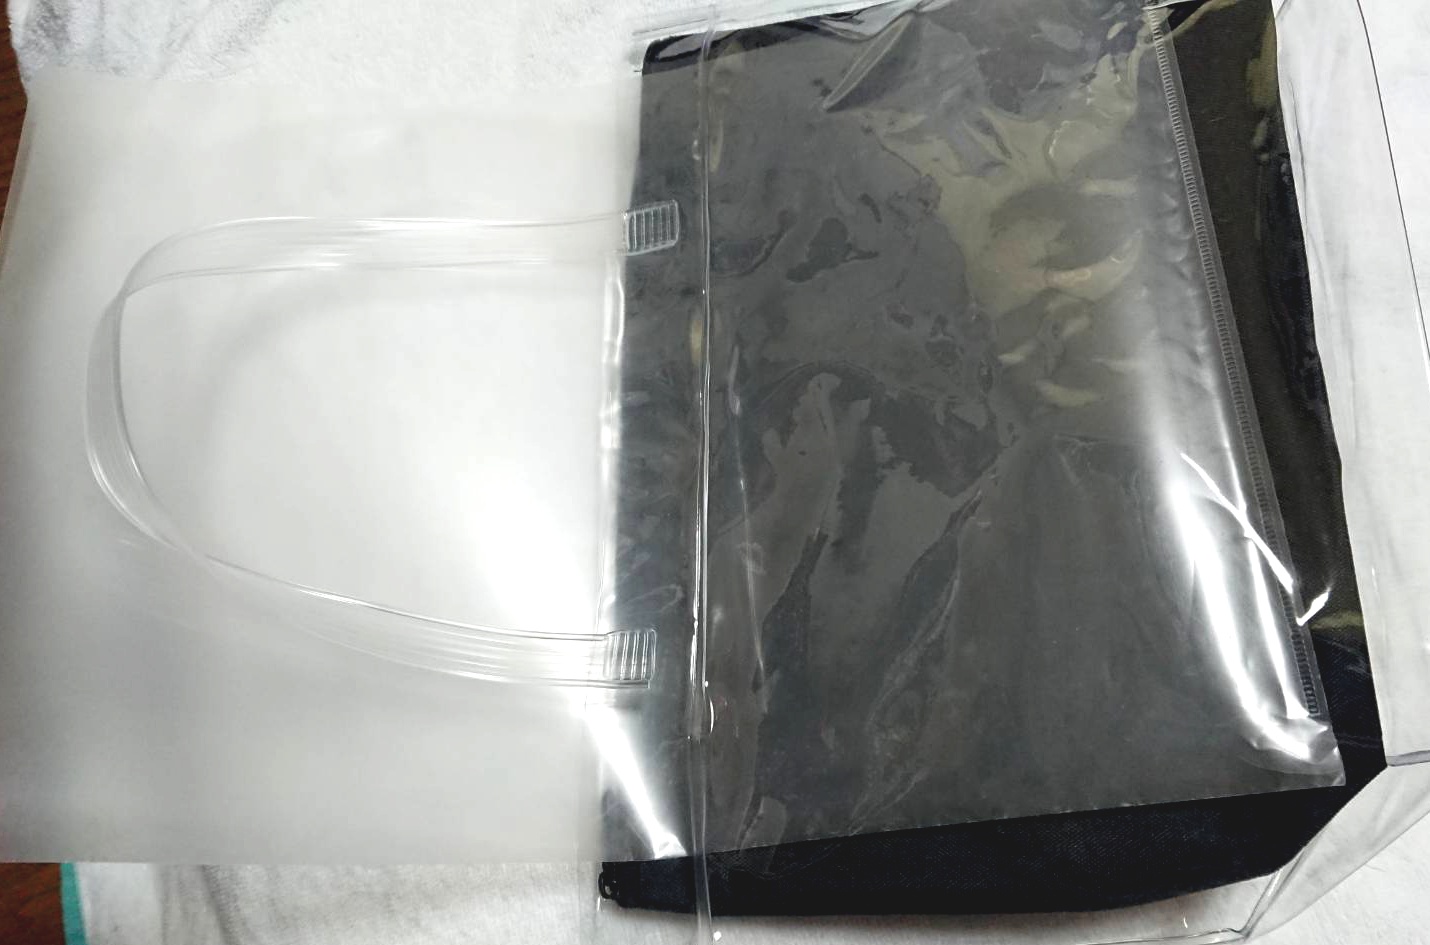 Cut the clear file to the size of the bag